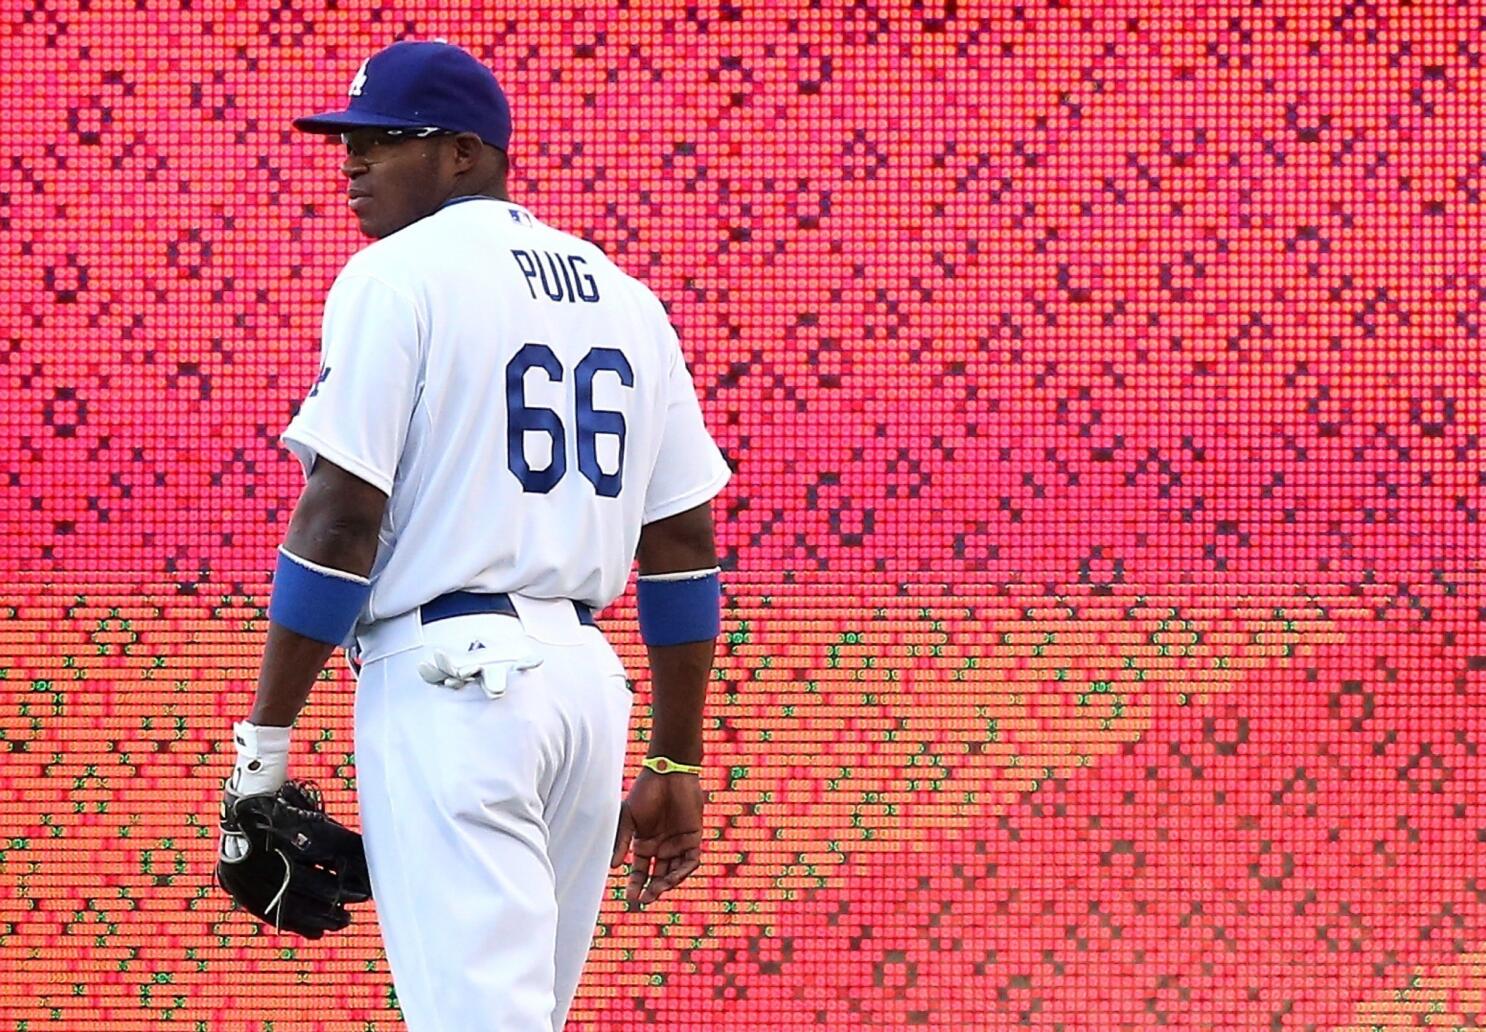 Yasiel Puig's No. 66 jersey a bestseller; four Dodgers in top 20 - Los